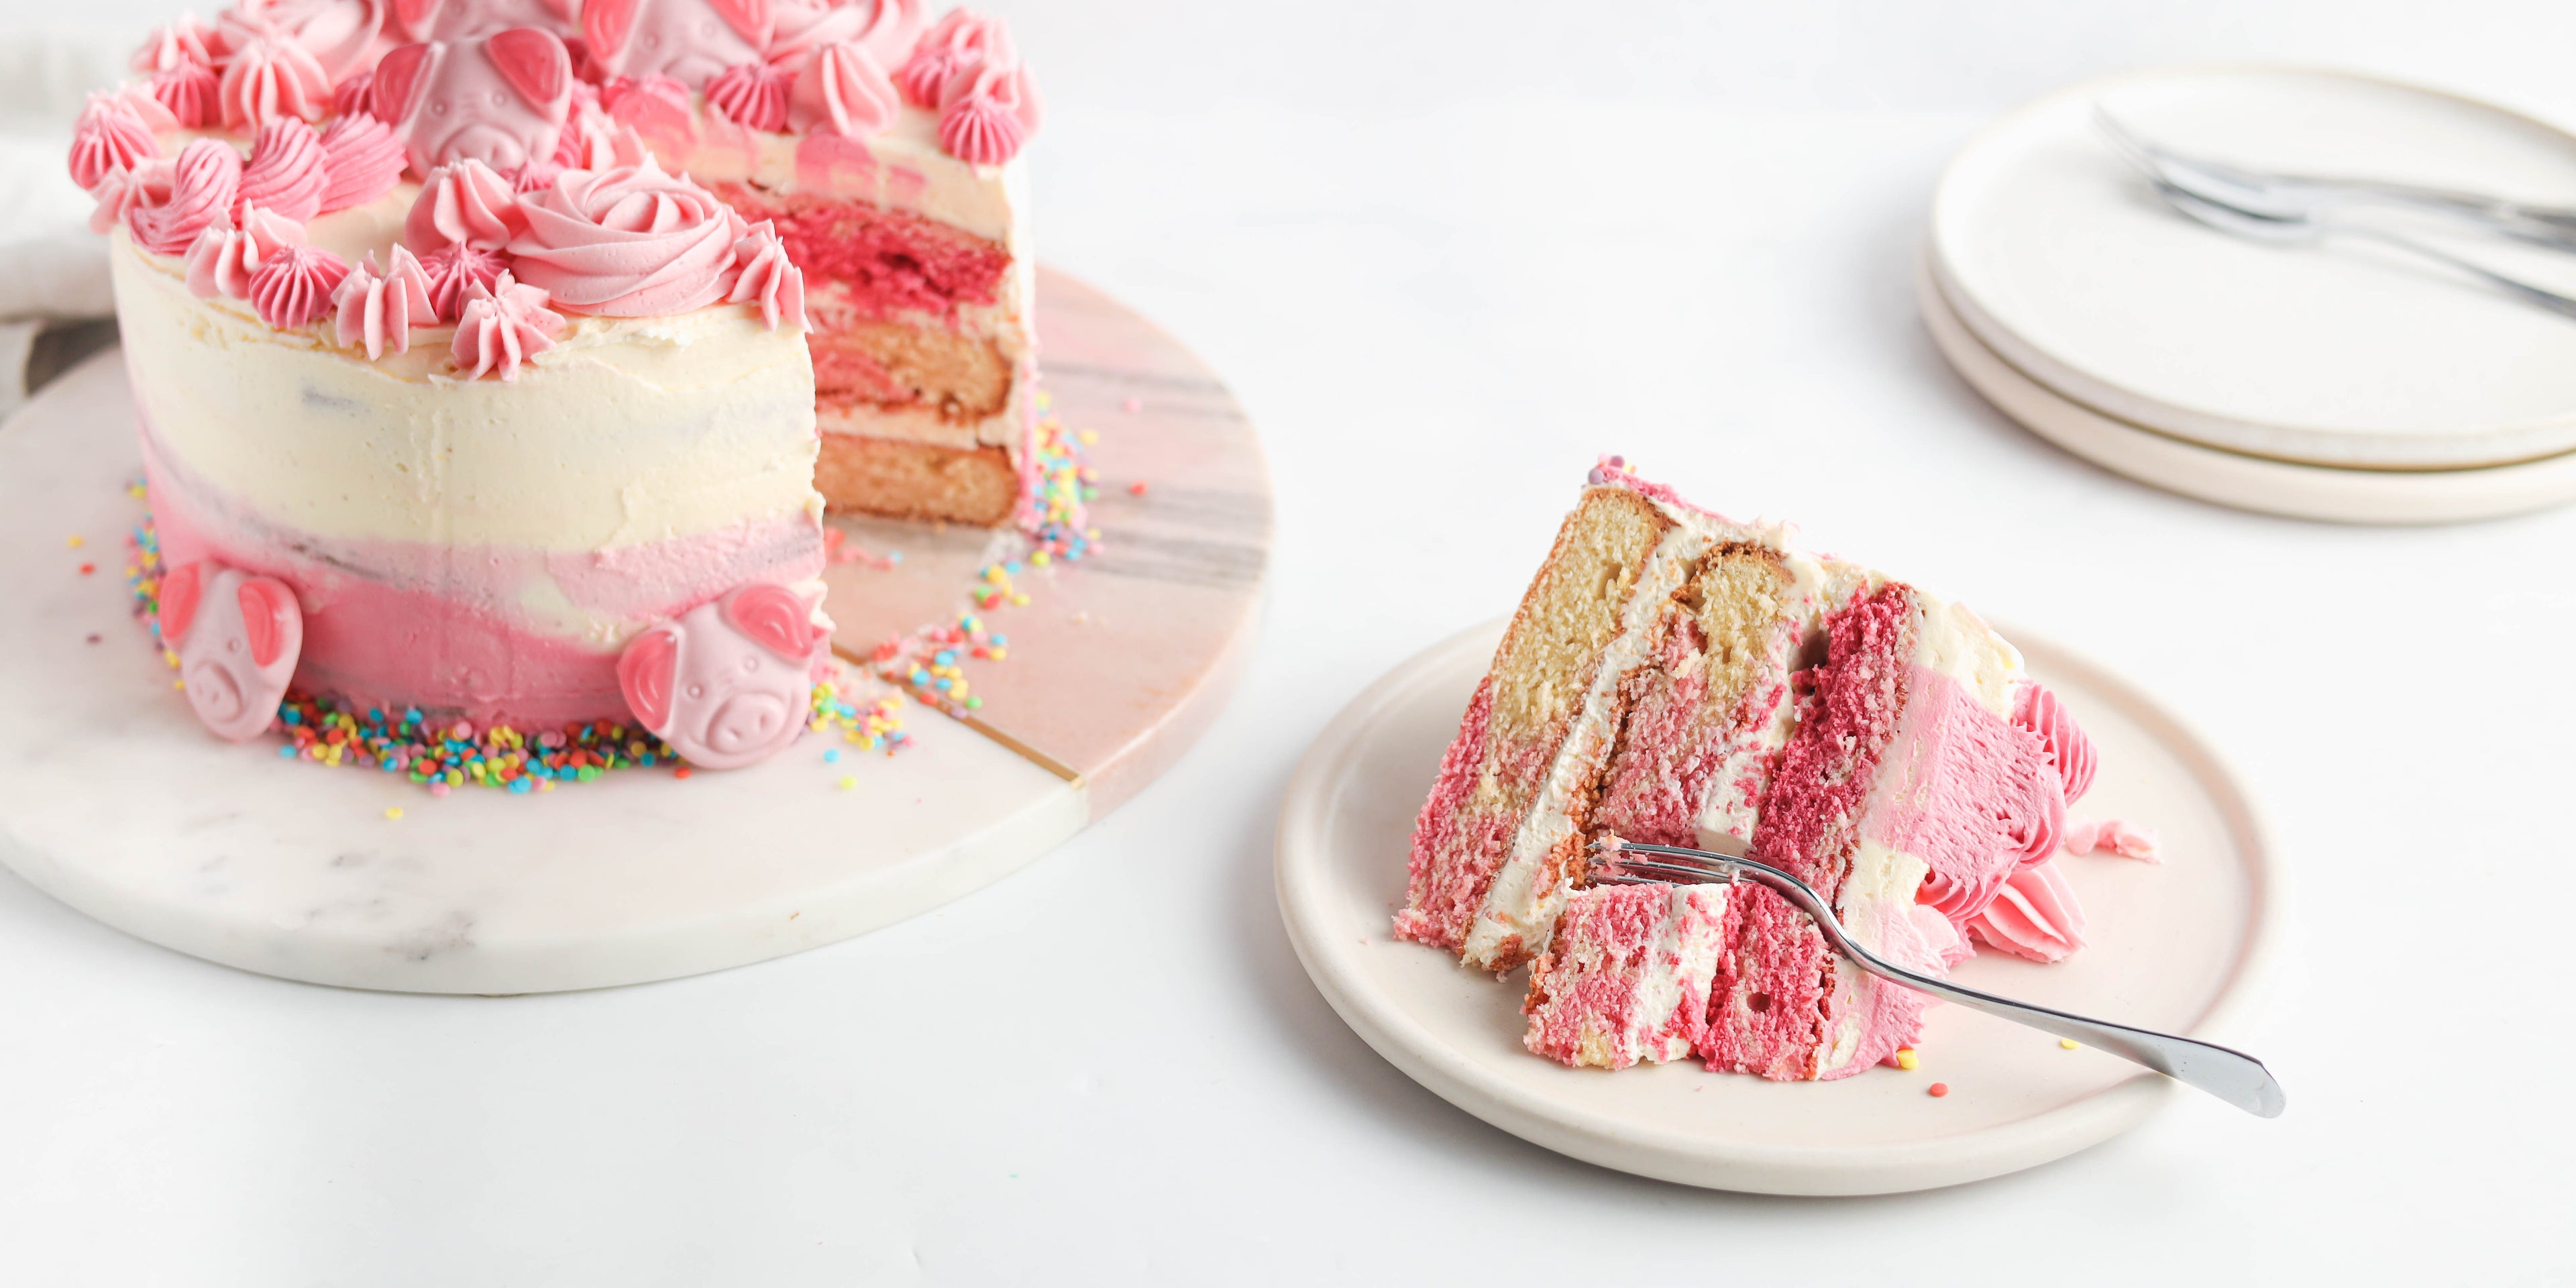 Percy Pig Marble Cake